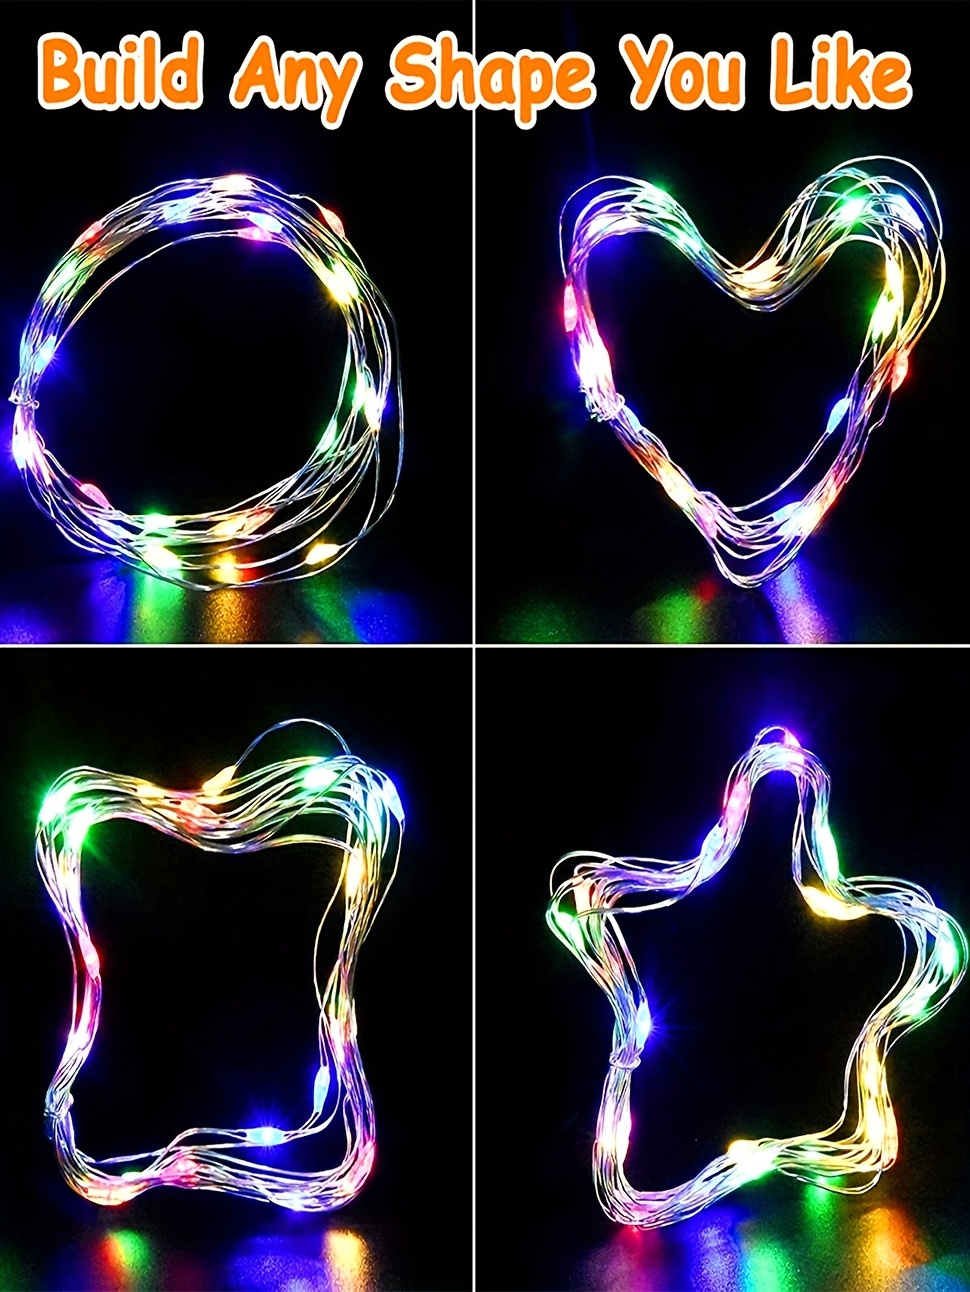 battery operated string lights, led fairy lights battery operated string lights copper wire string lights mini battery powered led lights for bedroom christmas parties wedding centerpiece decoration details 7